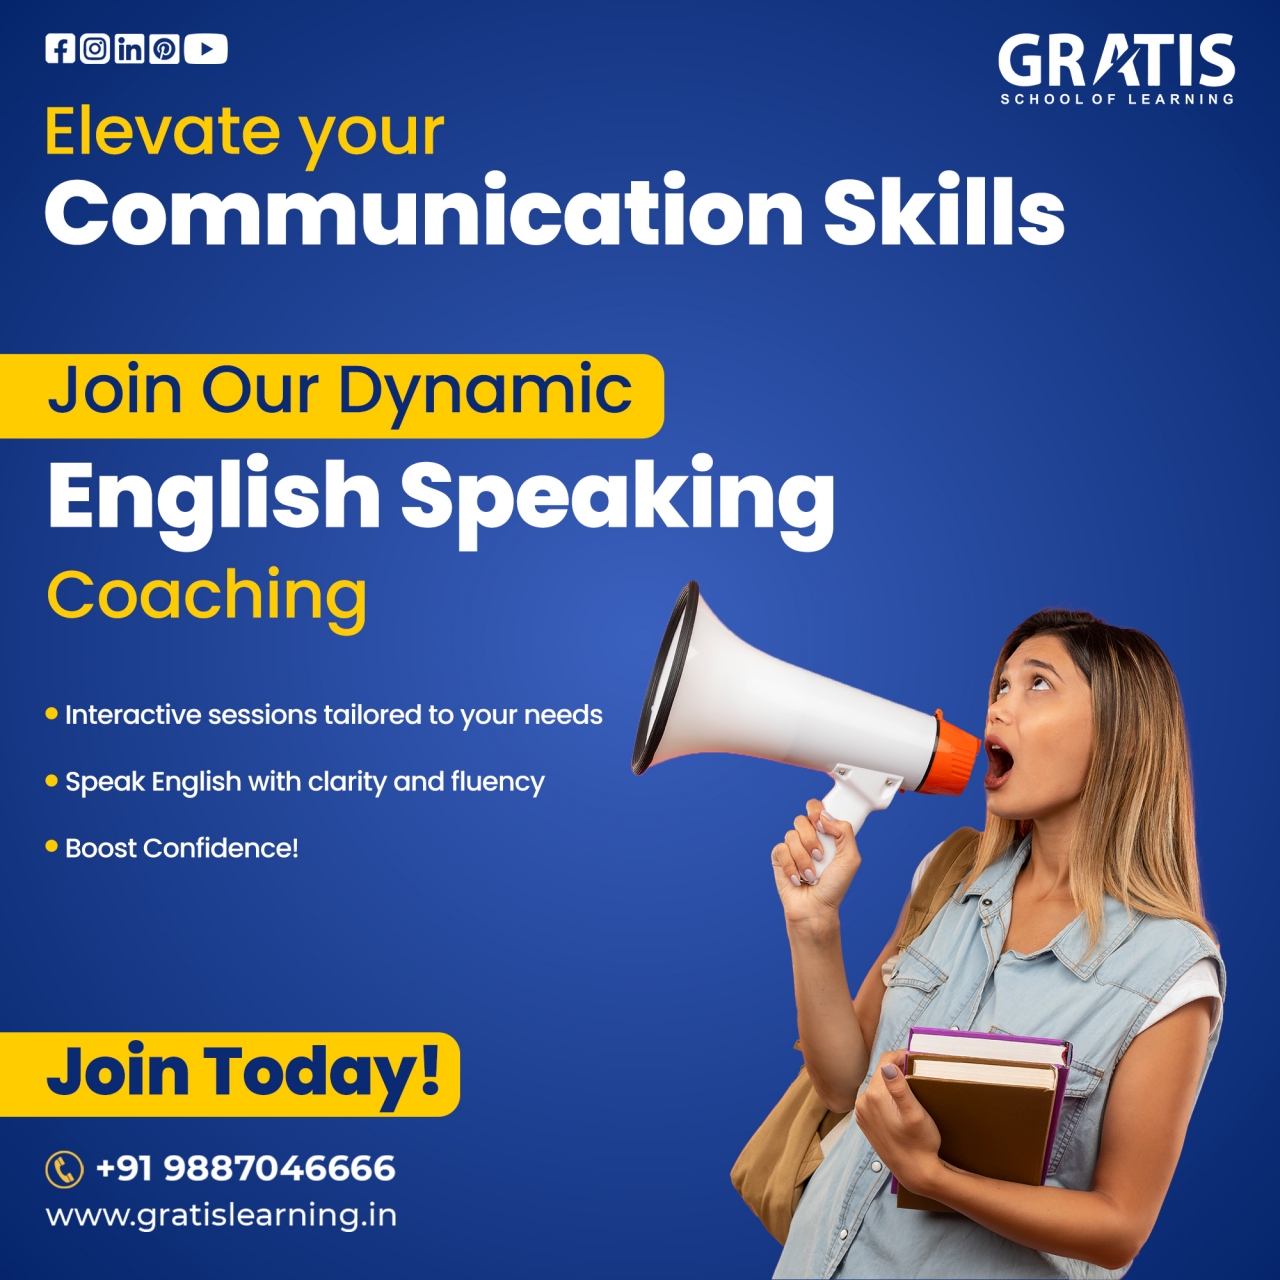 Gratis Learning: Best IELTS, PTE, Spoken English, Business English, Personality Development and CELPIP Institute in Panchkula - Chandigarh